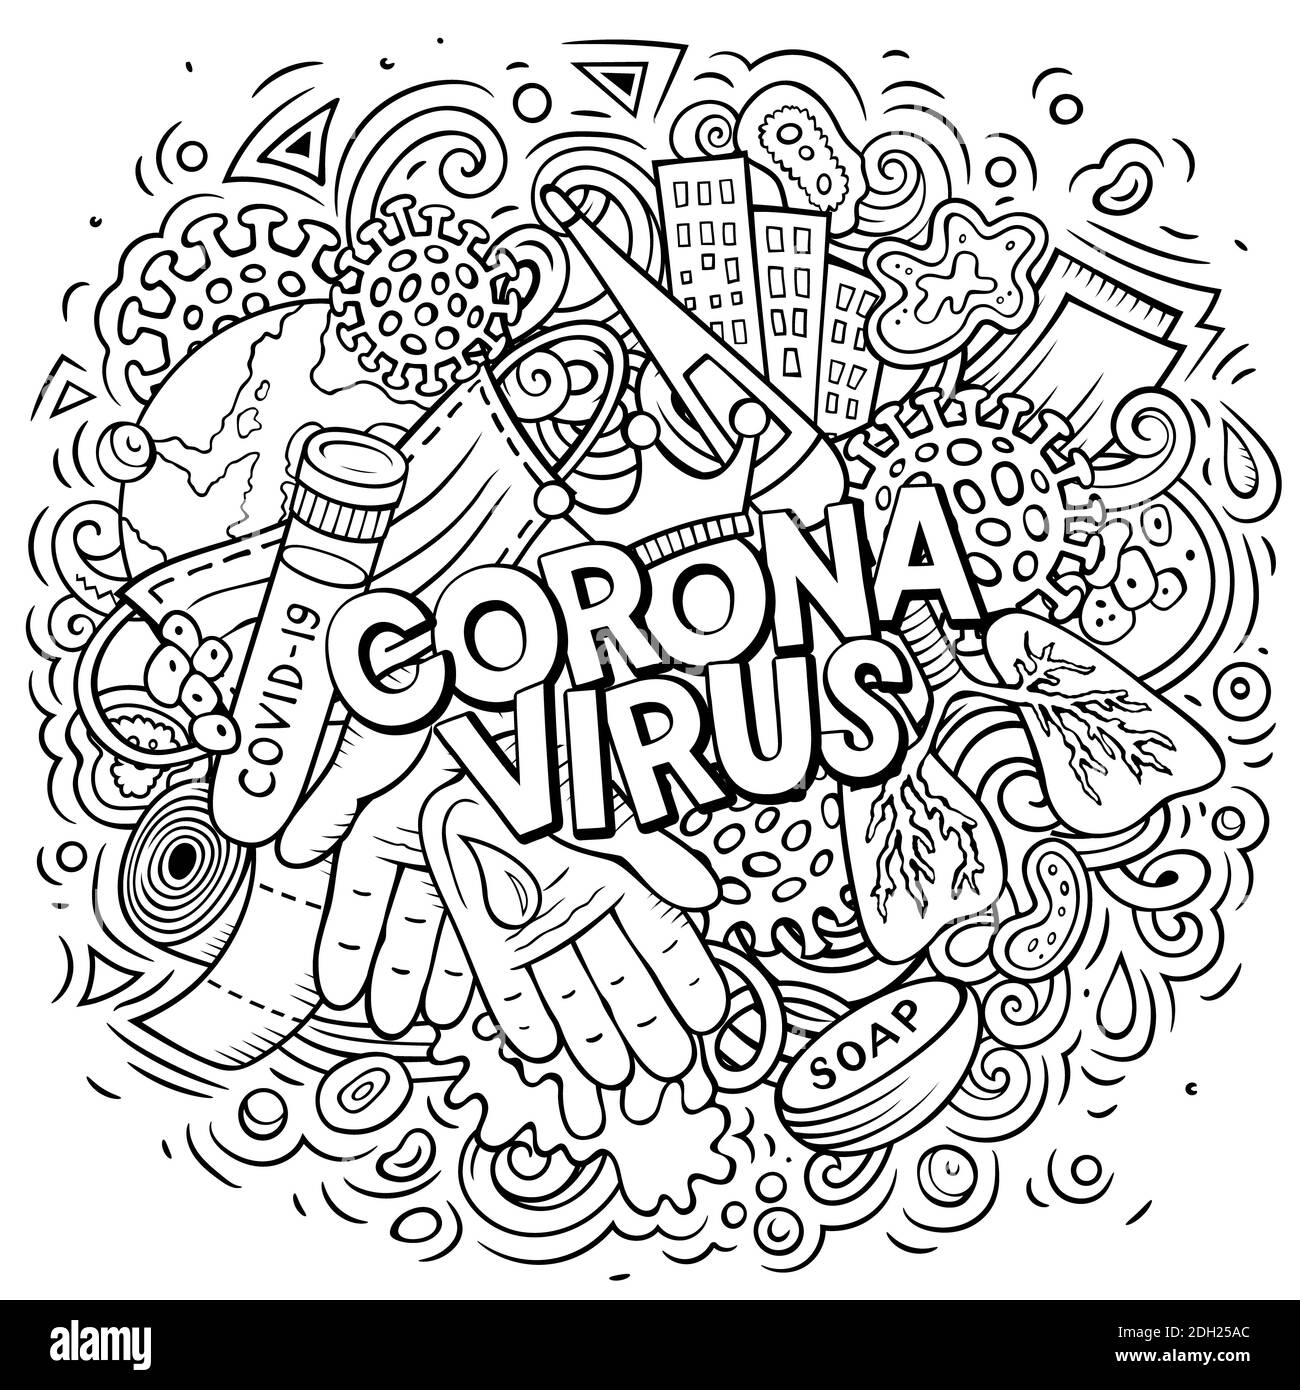 Coronavirus hand drawn cartoon doodles illustration. Creative art raster background. Handwritten text with medical elements and objects. Sketchy compo Stock Photo